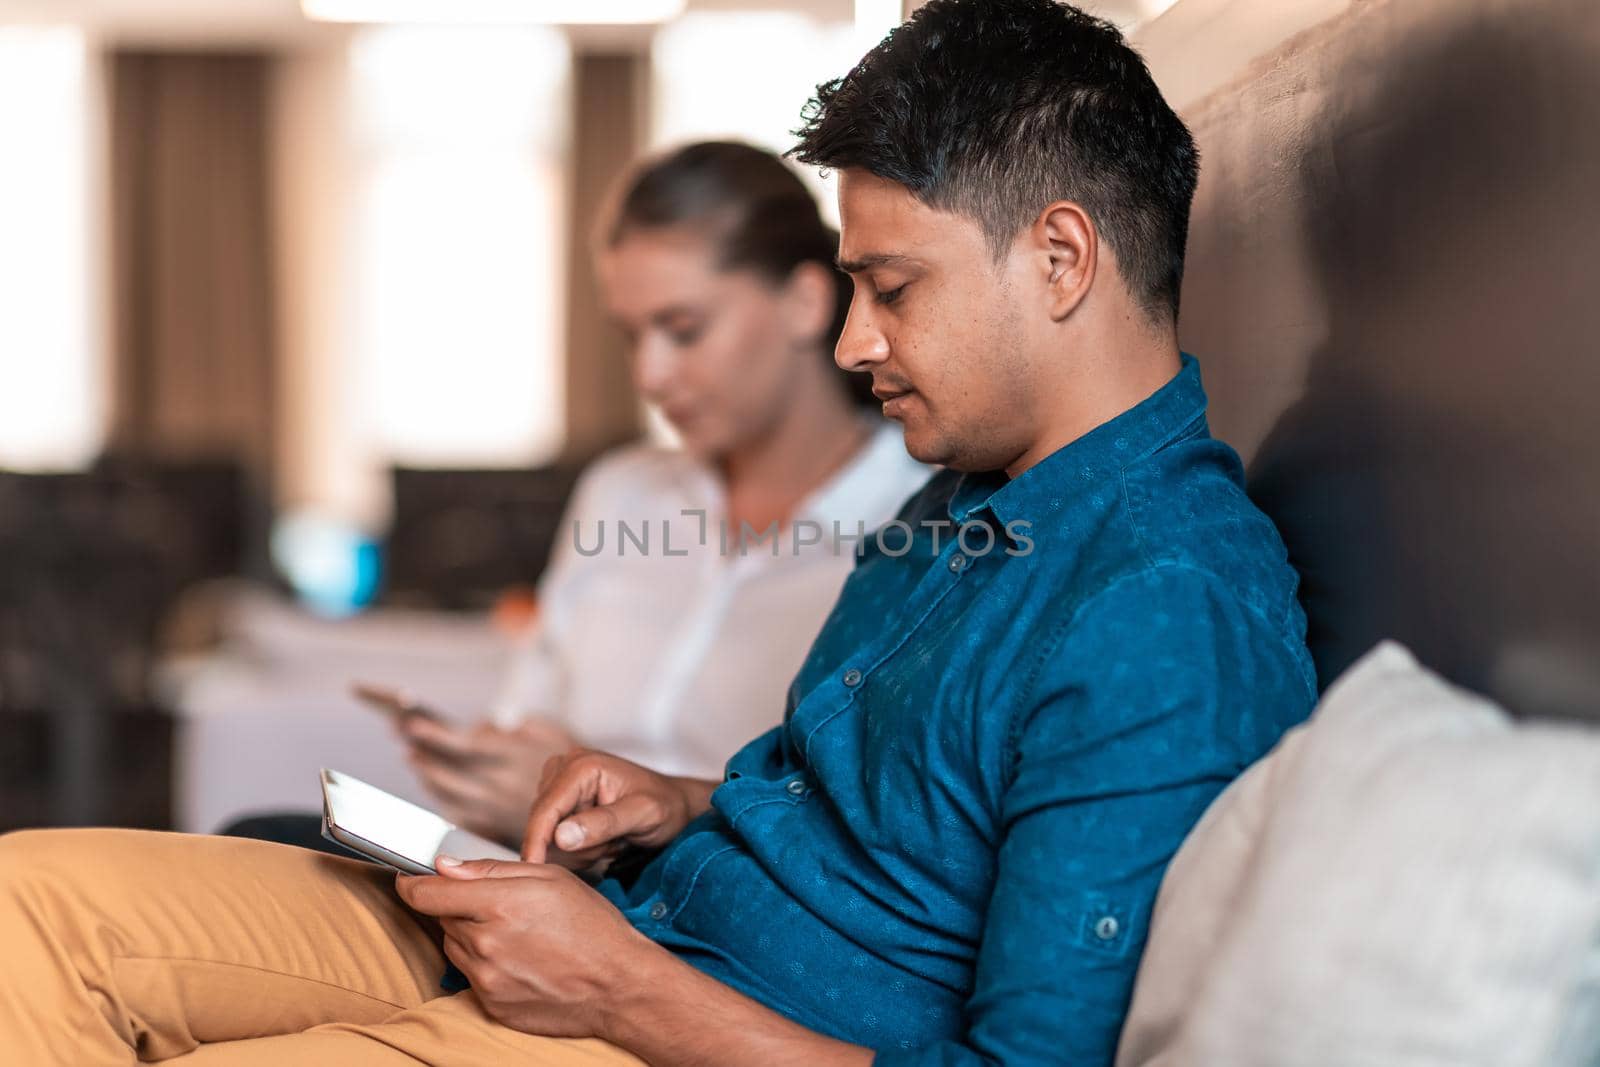 Multiethnic business people man with a female colleague working together on tablet computer in relaxation area of modern startup office. High-quality photo